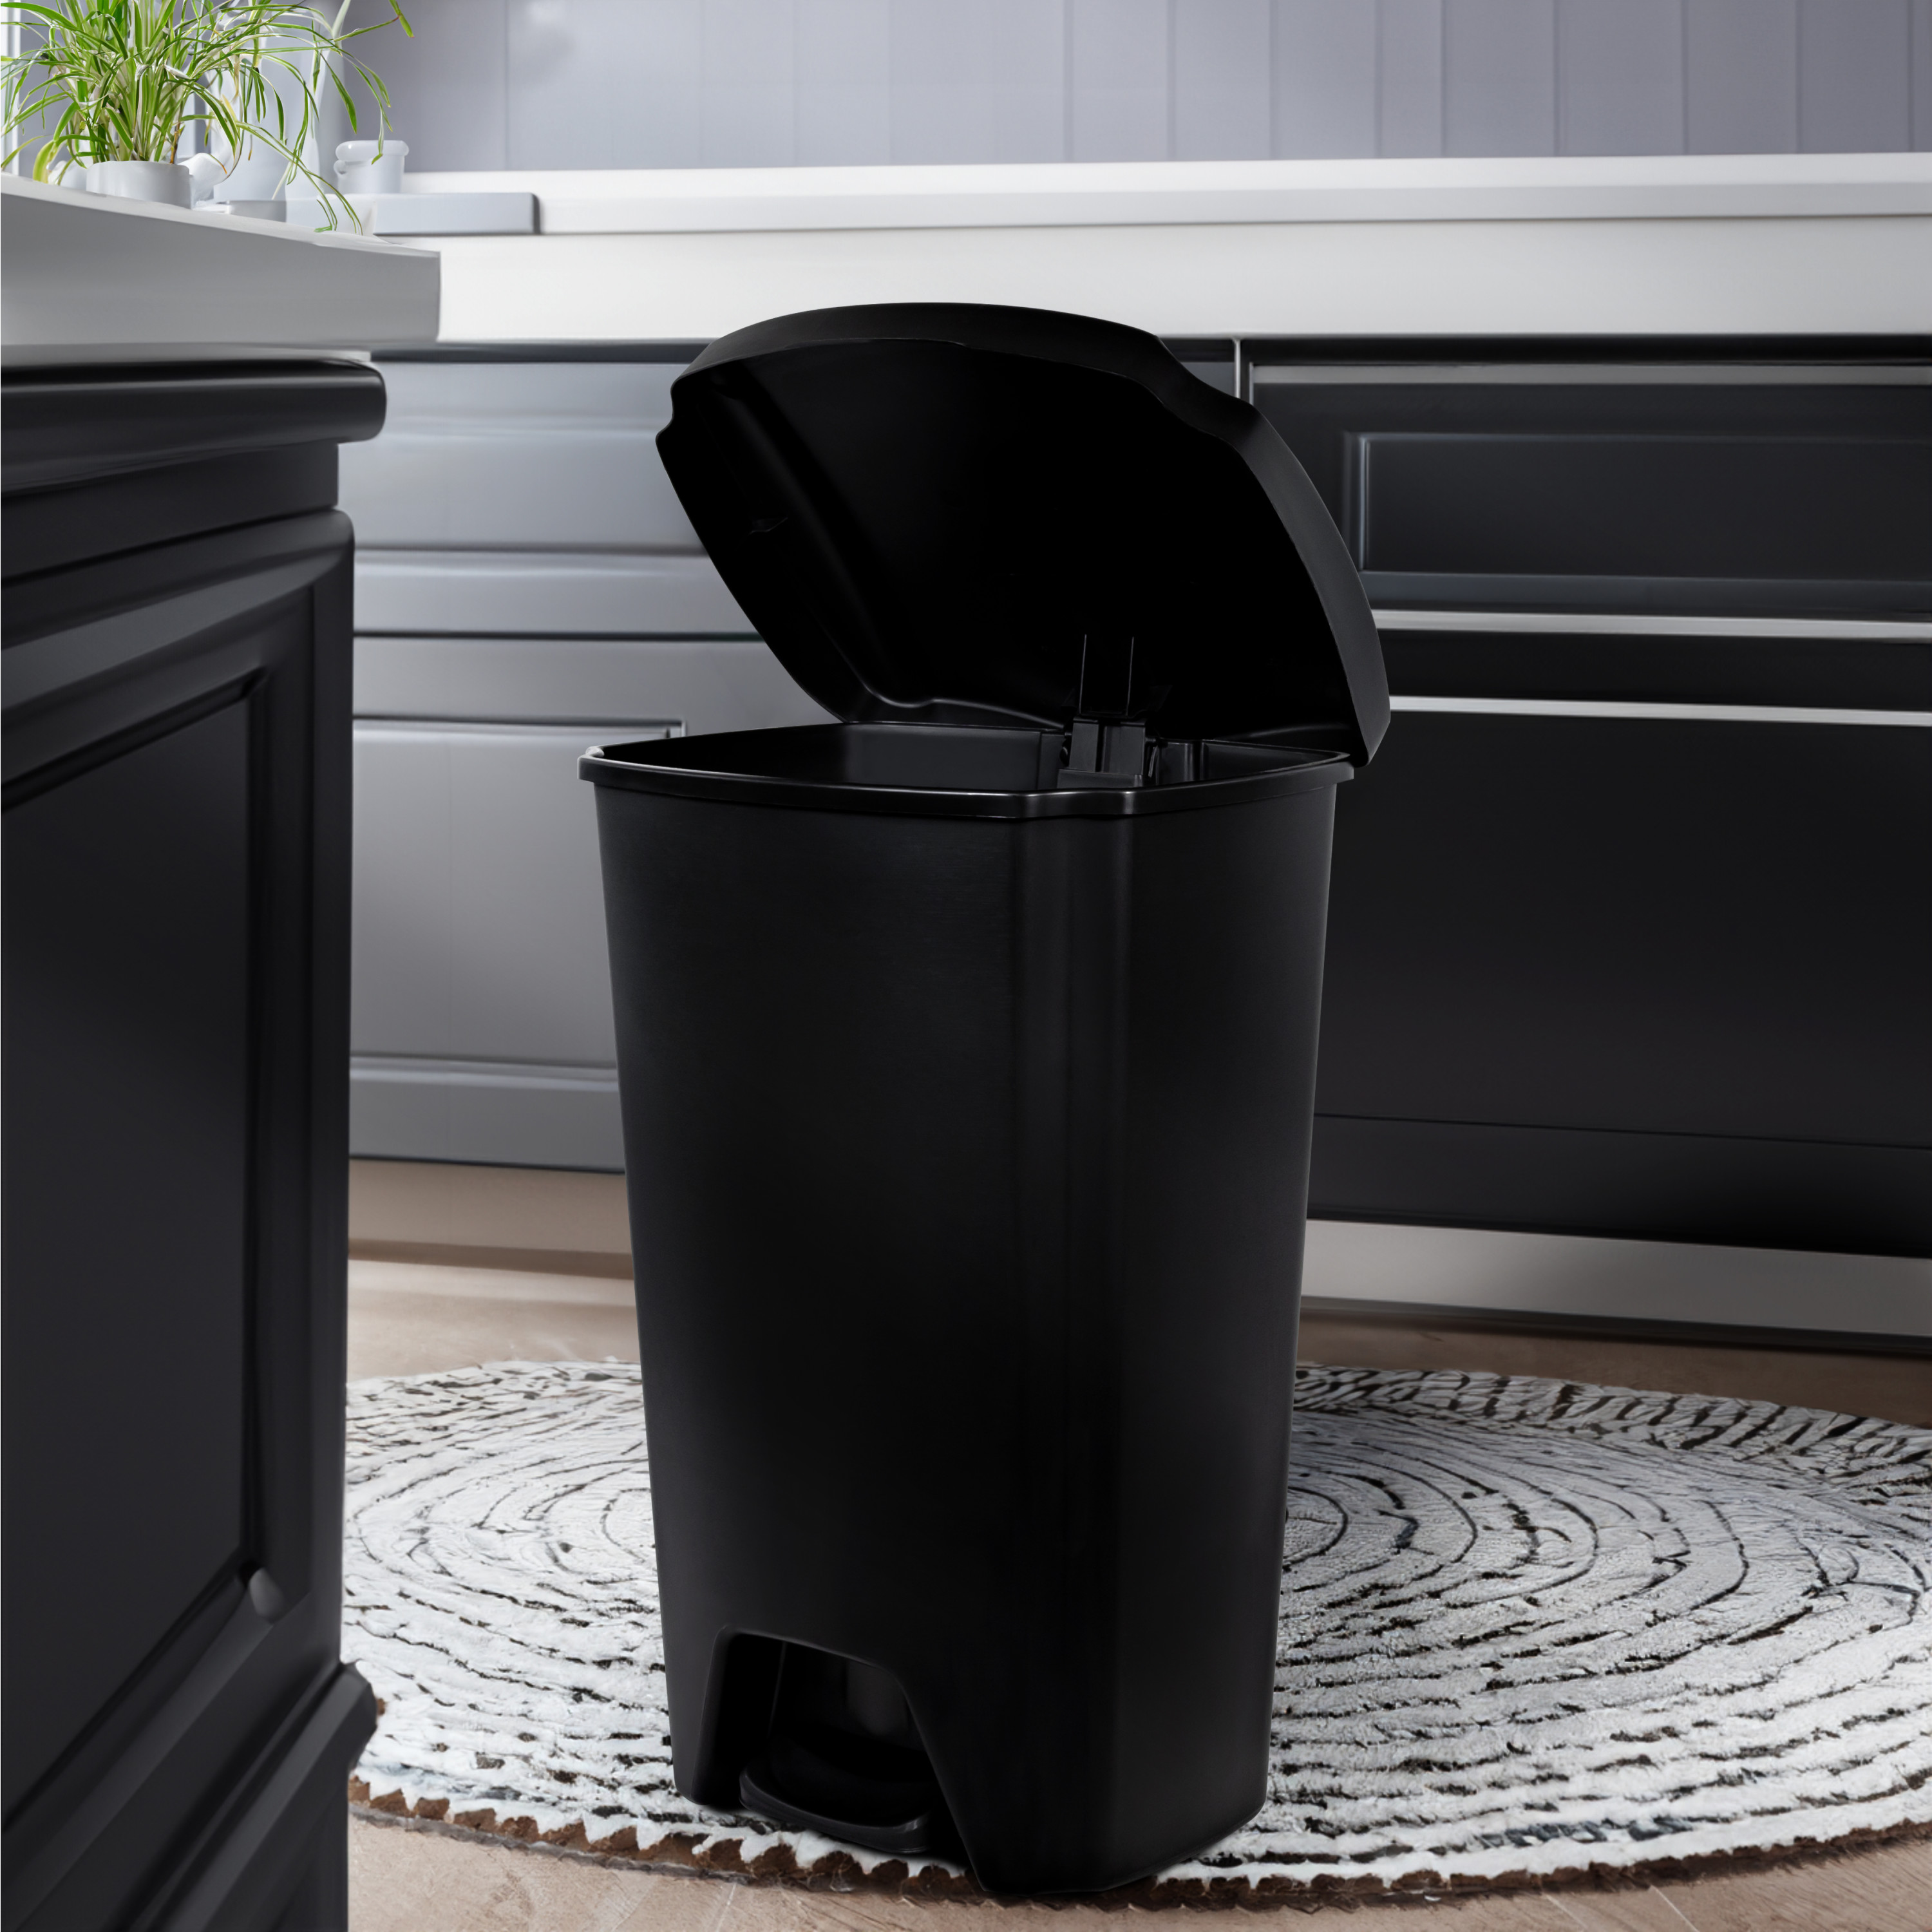 Hefty 12.1 Gallon Trash Can, Plastic Step On Kitchen Trash Can, Black - image 4 of 8